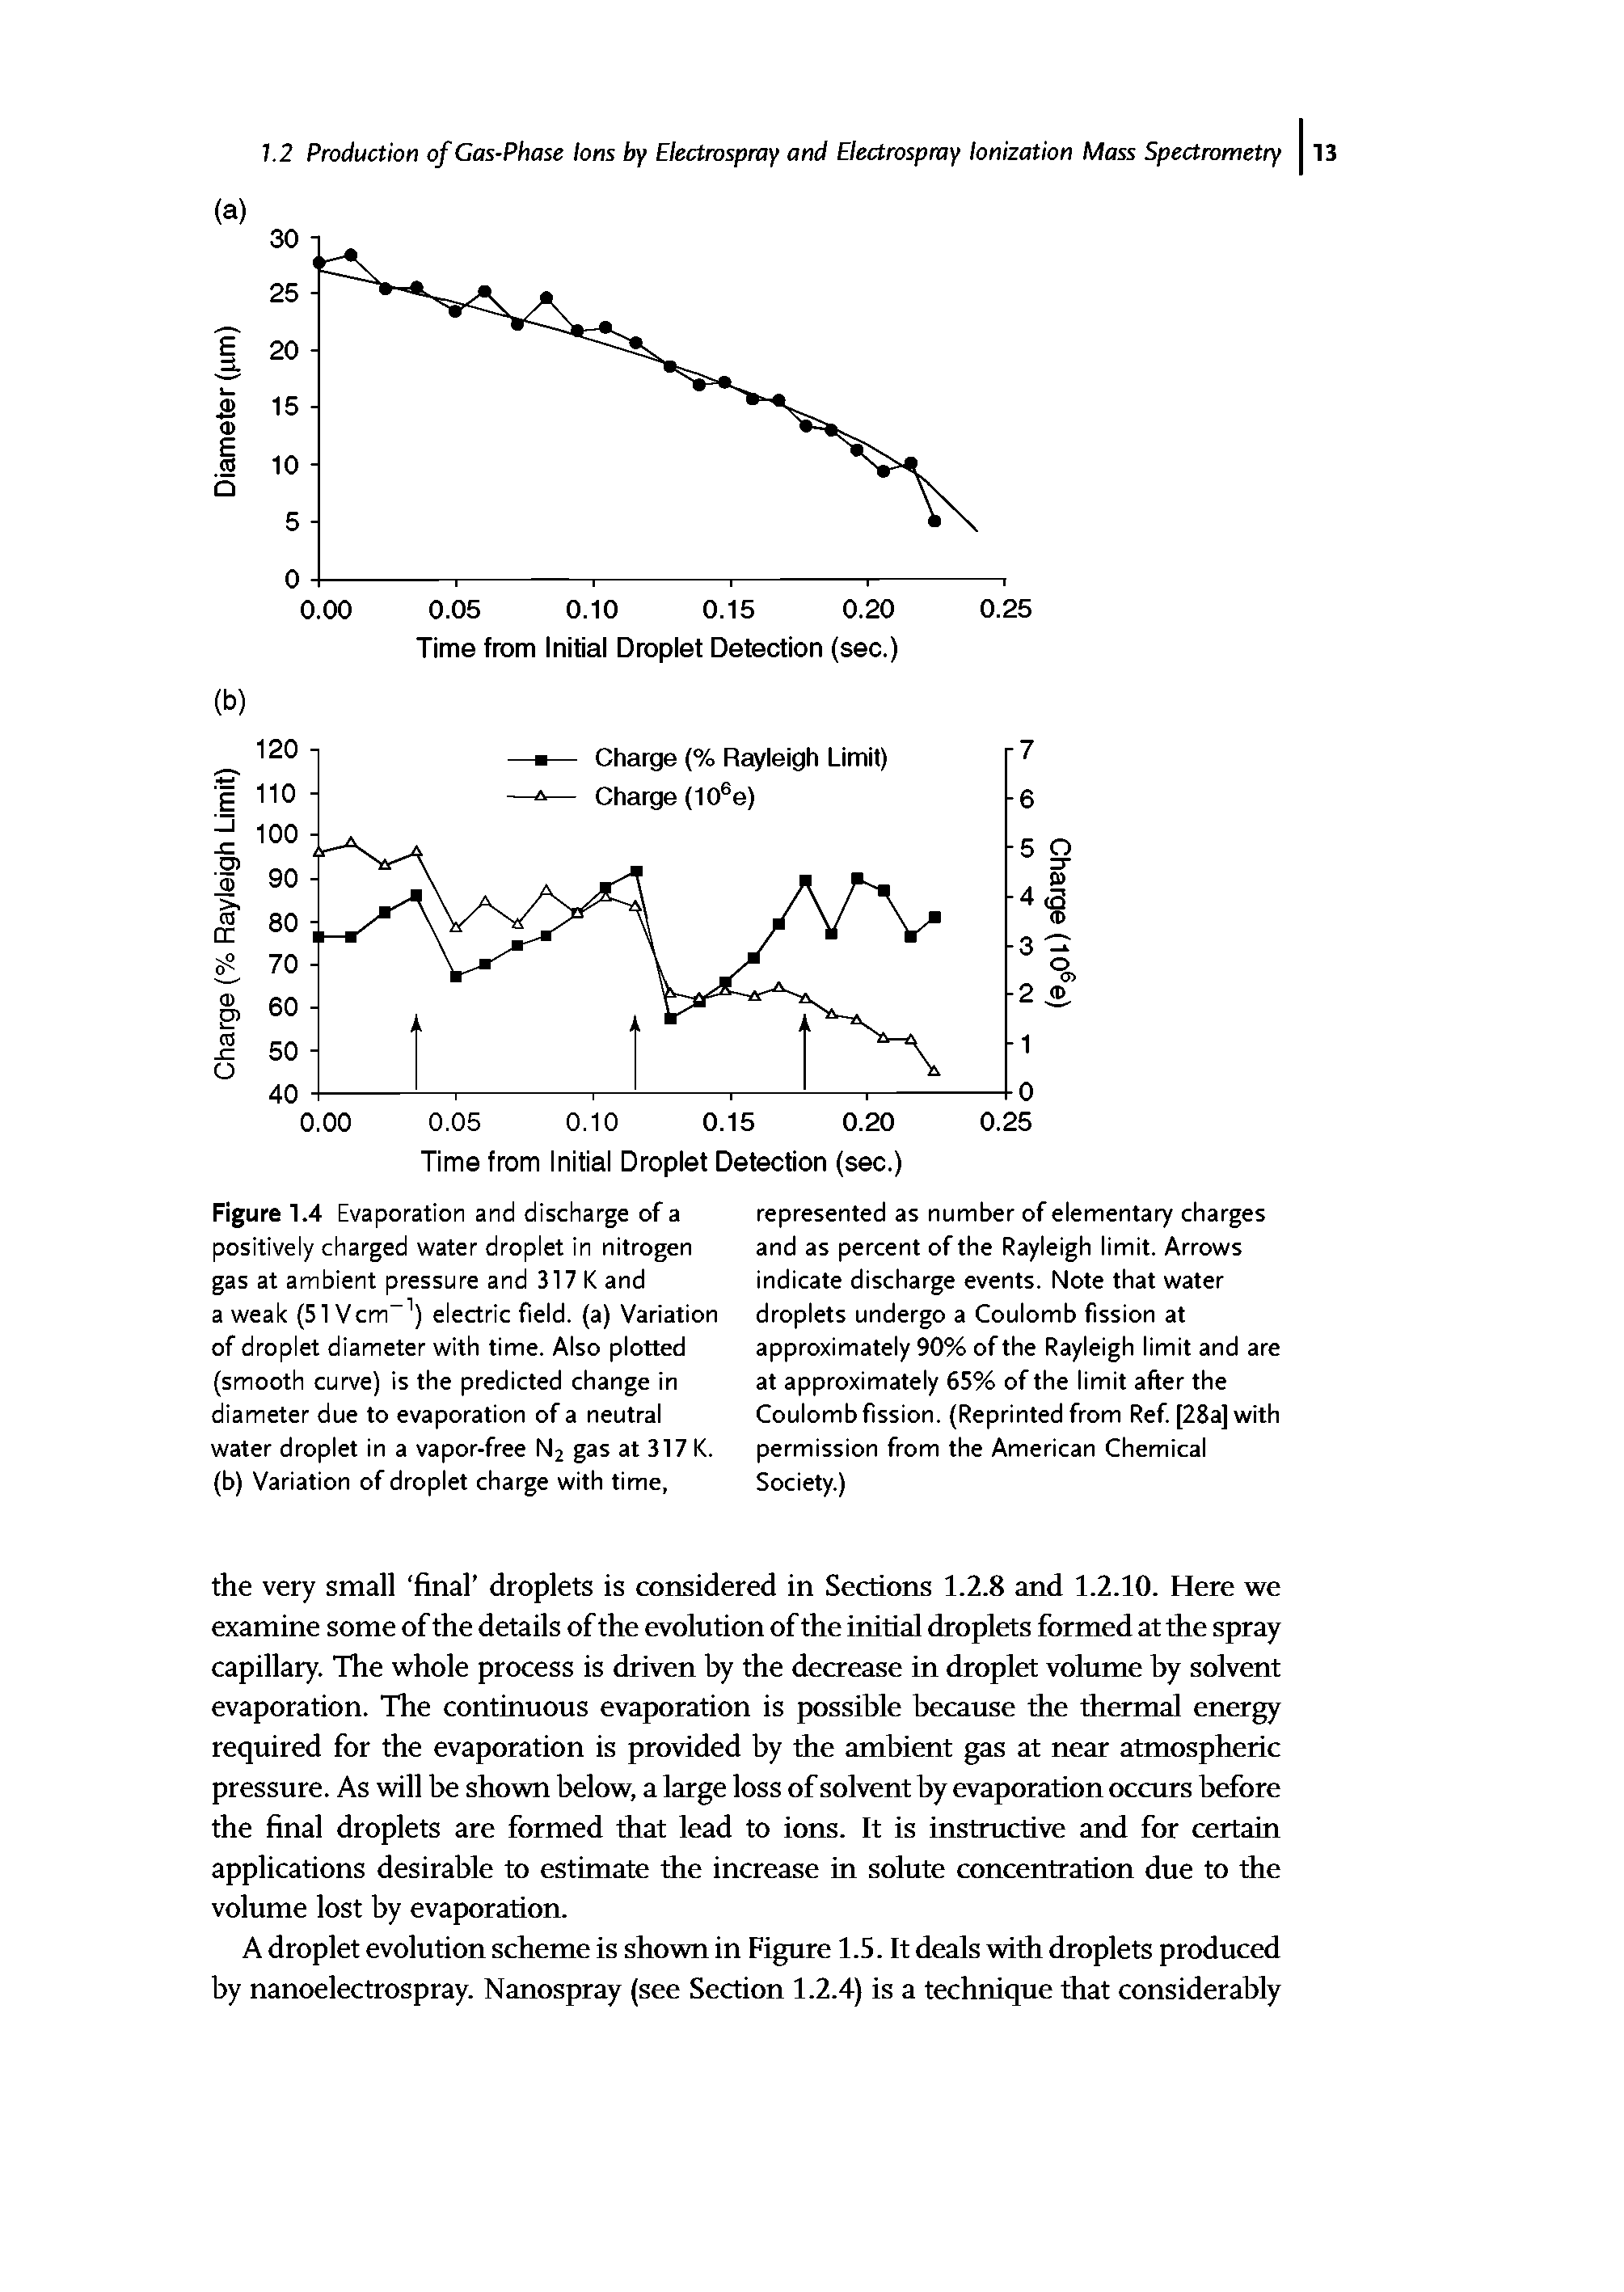 Figure 1.4 Evaporation and discharge of a positively charged water droplet in nitrogen gas at ambient pressure and 317 K and a weak (51 Vcm ) electric field, (a) Variation of droplet diameter with time. Also plotted (smooth curve) is the predicted change in diameter due to evaporation of a neutral water droplet in a vapor-free N2 gas at 317 K. (b) Variation of droplet charge with time,...